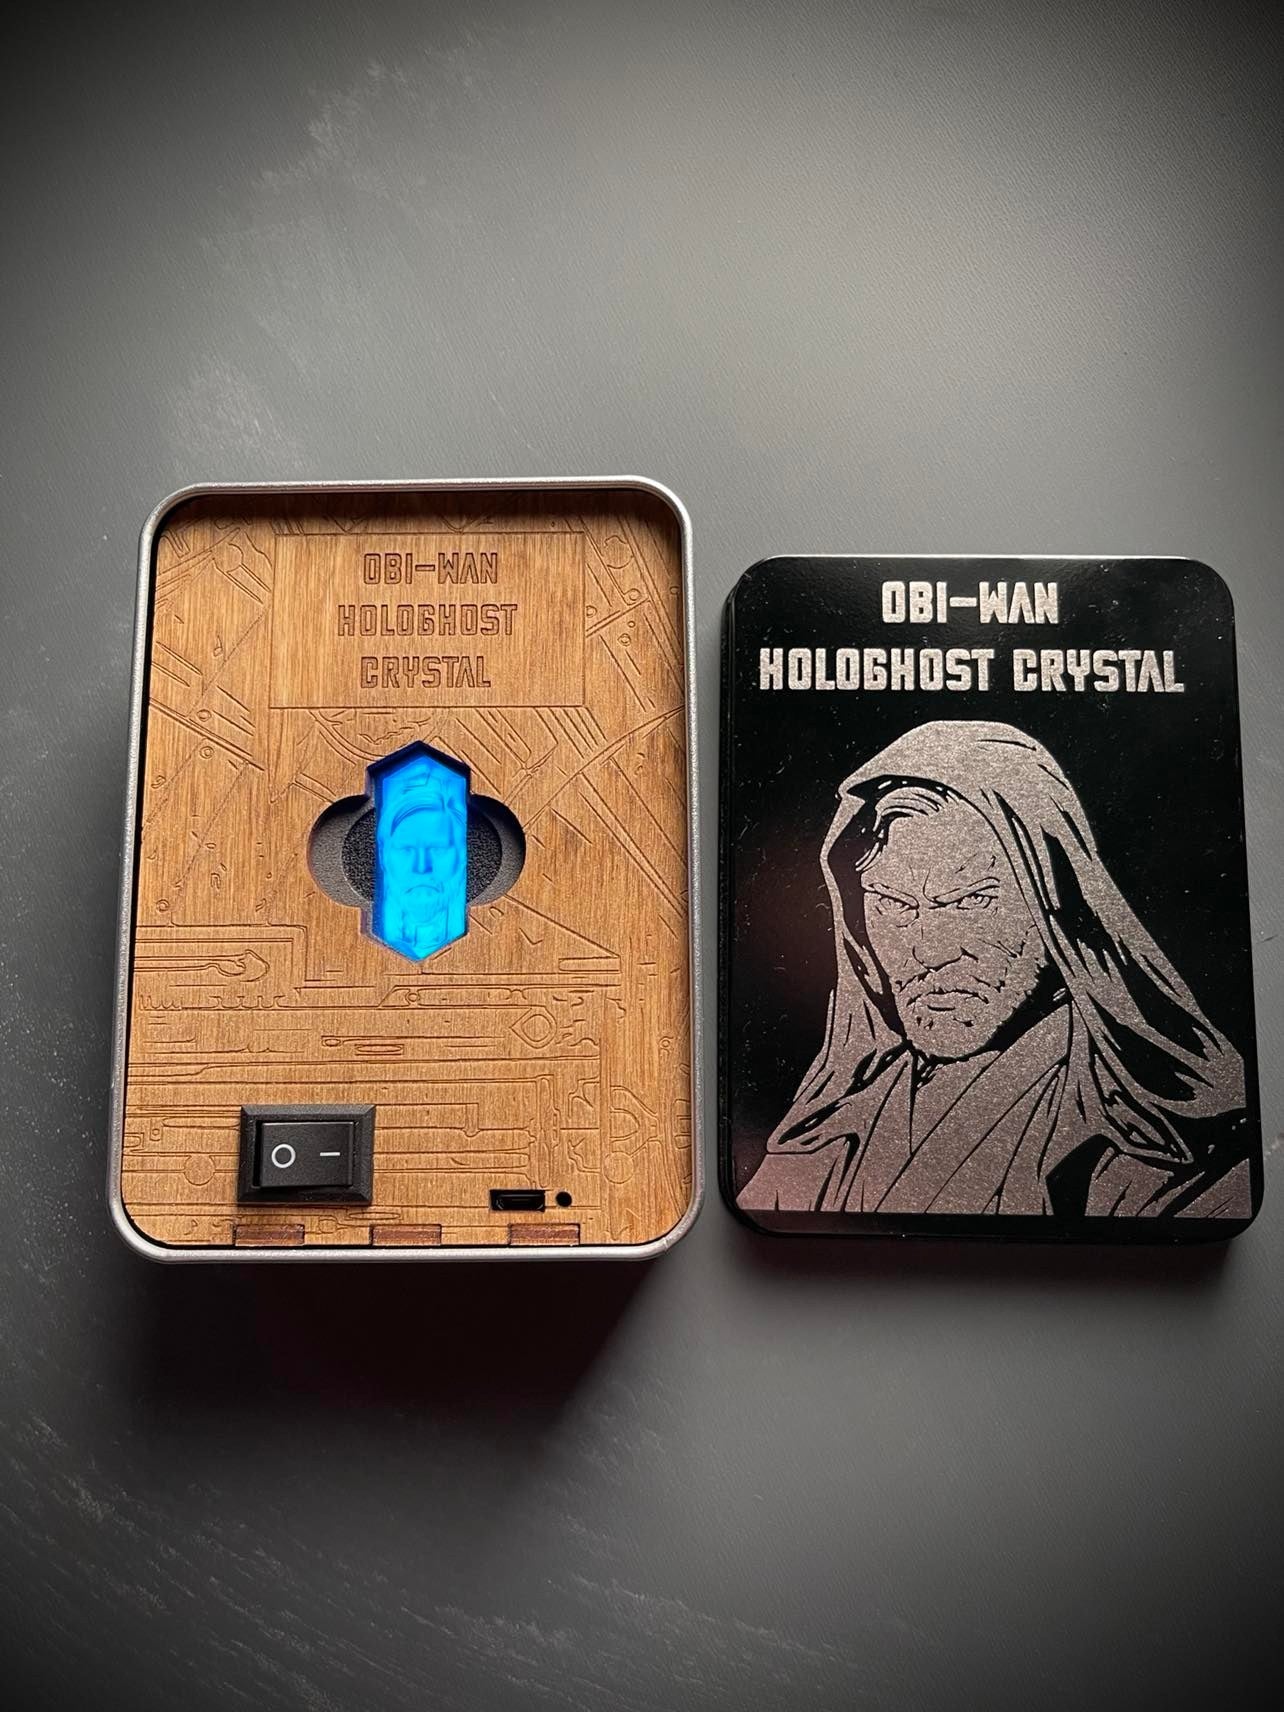 Collectors Edition: Ben Hologhost Crystal